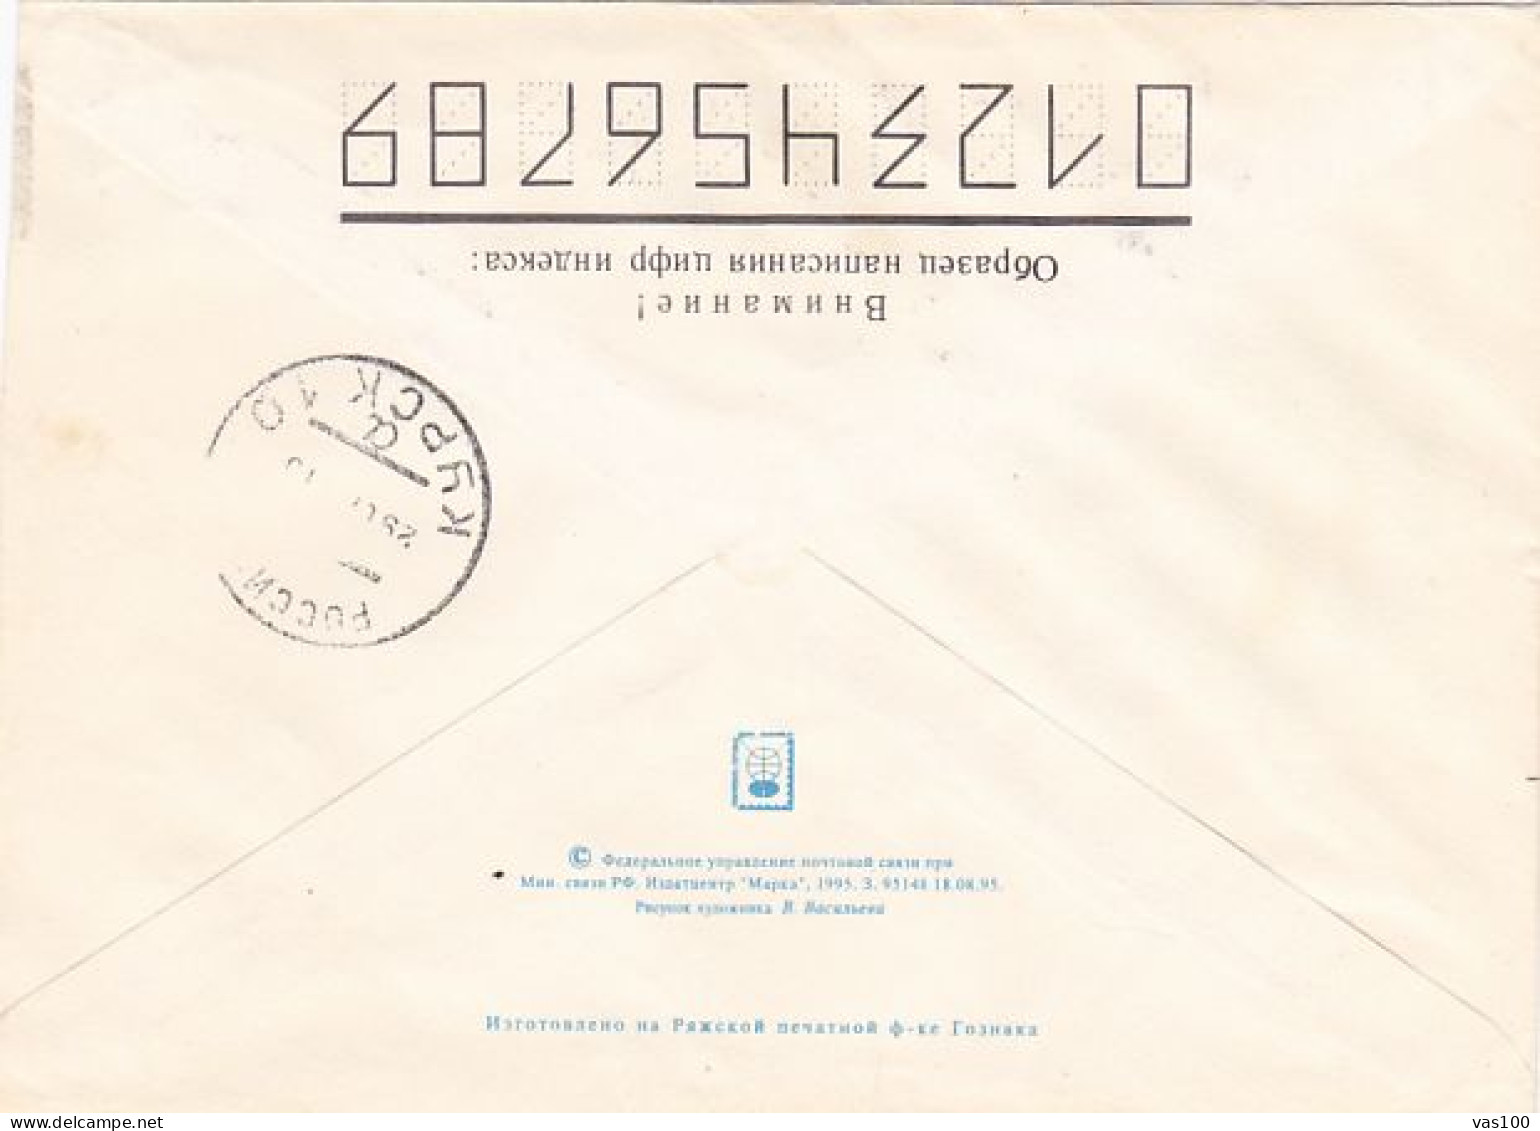 MOSCOW METROPOLITAN SUBWAY, STATION, COVER STATIONERY, ENTIER POSTAL, 1995, RUSSIA - Ganzsachen